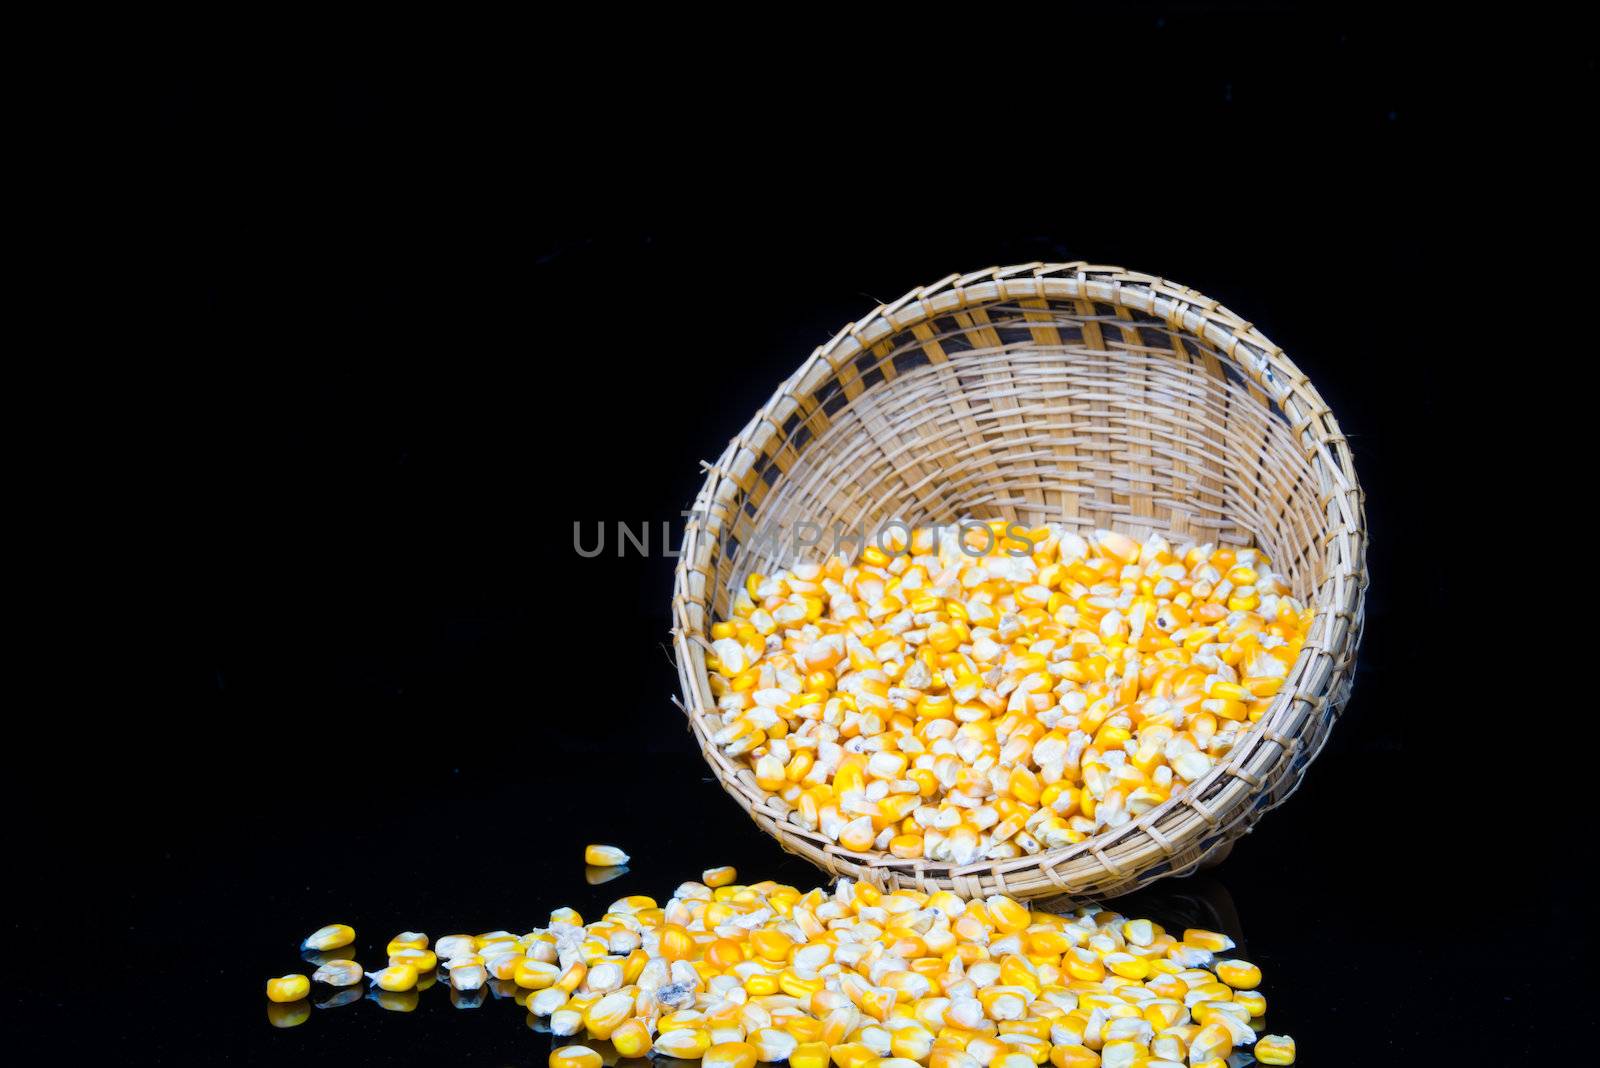 corn and corn seeds in a Basket on black background.